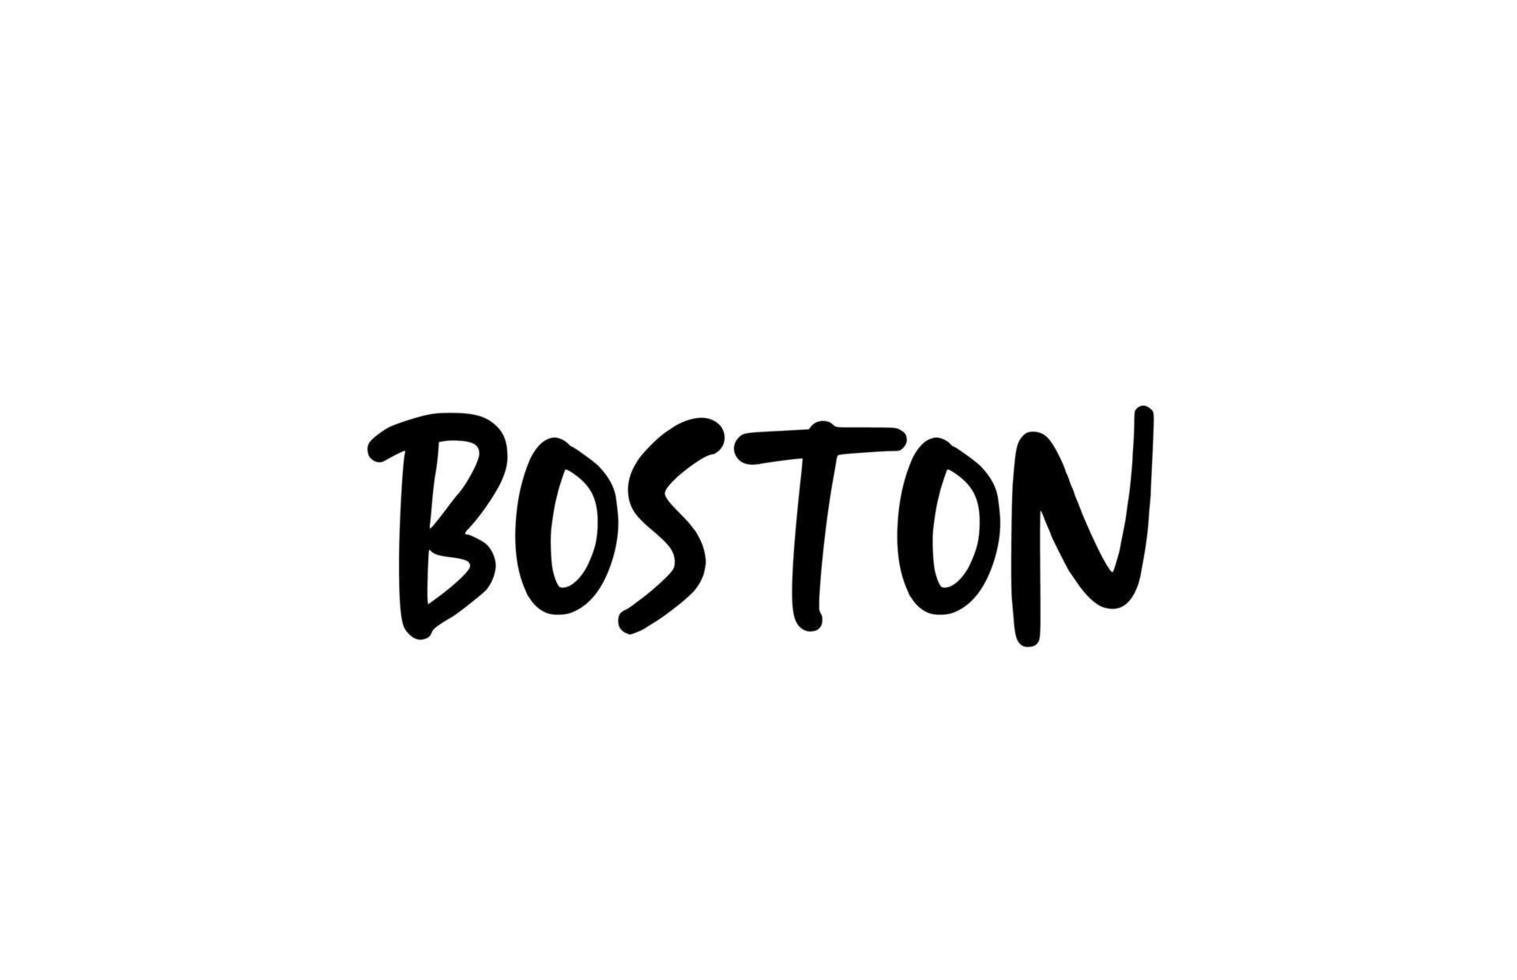 Boston city handwritten typography word text hand lettering. Modern calligraphy text. Black color vector